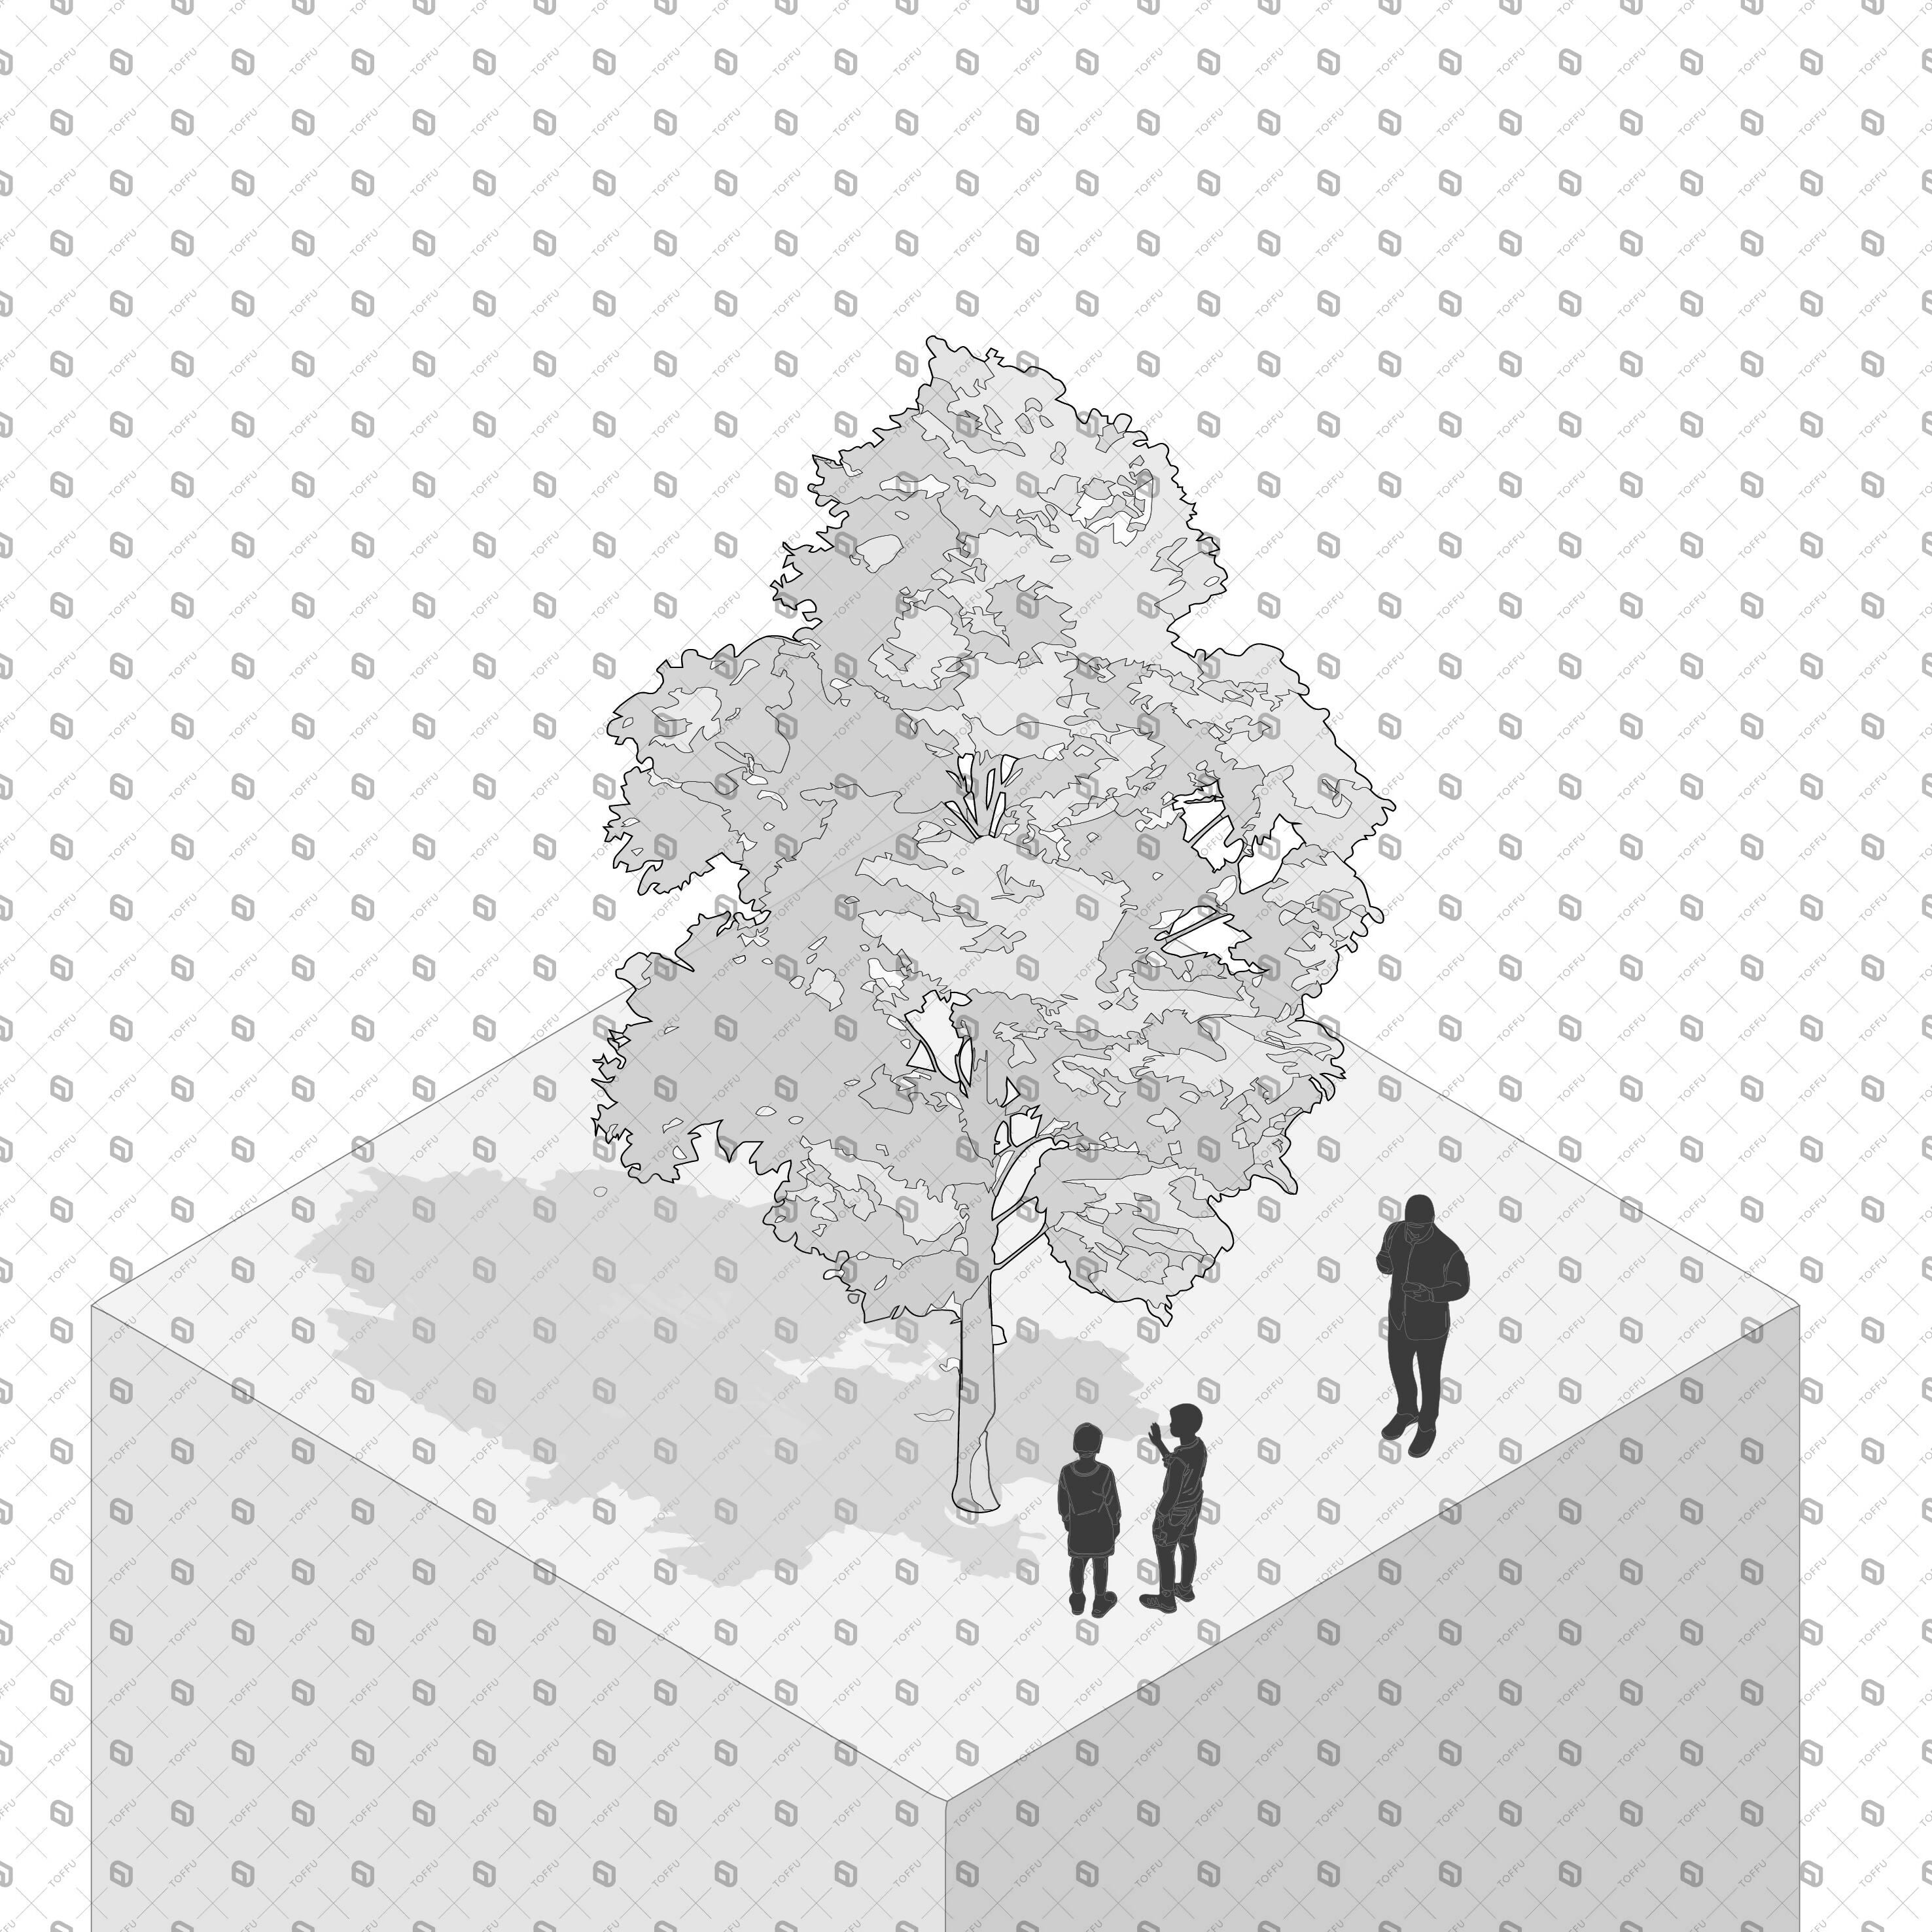 Axonometric Cad Trees with Shadows PNG - Toffu Co